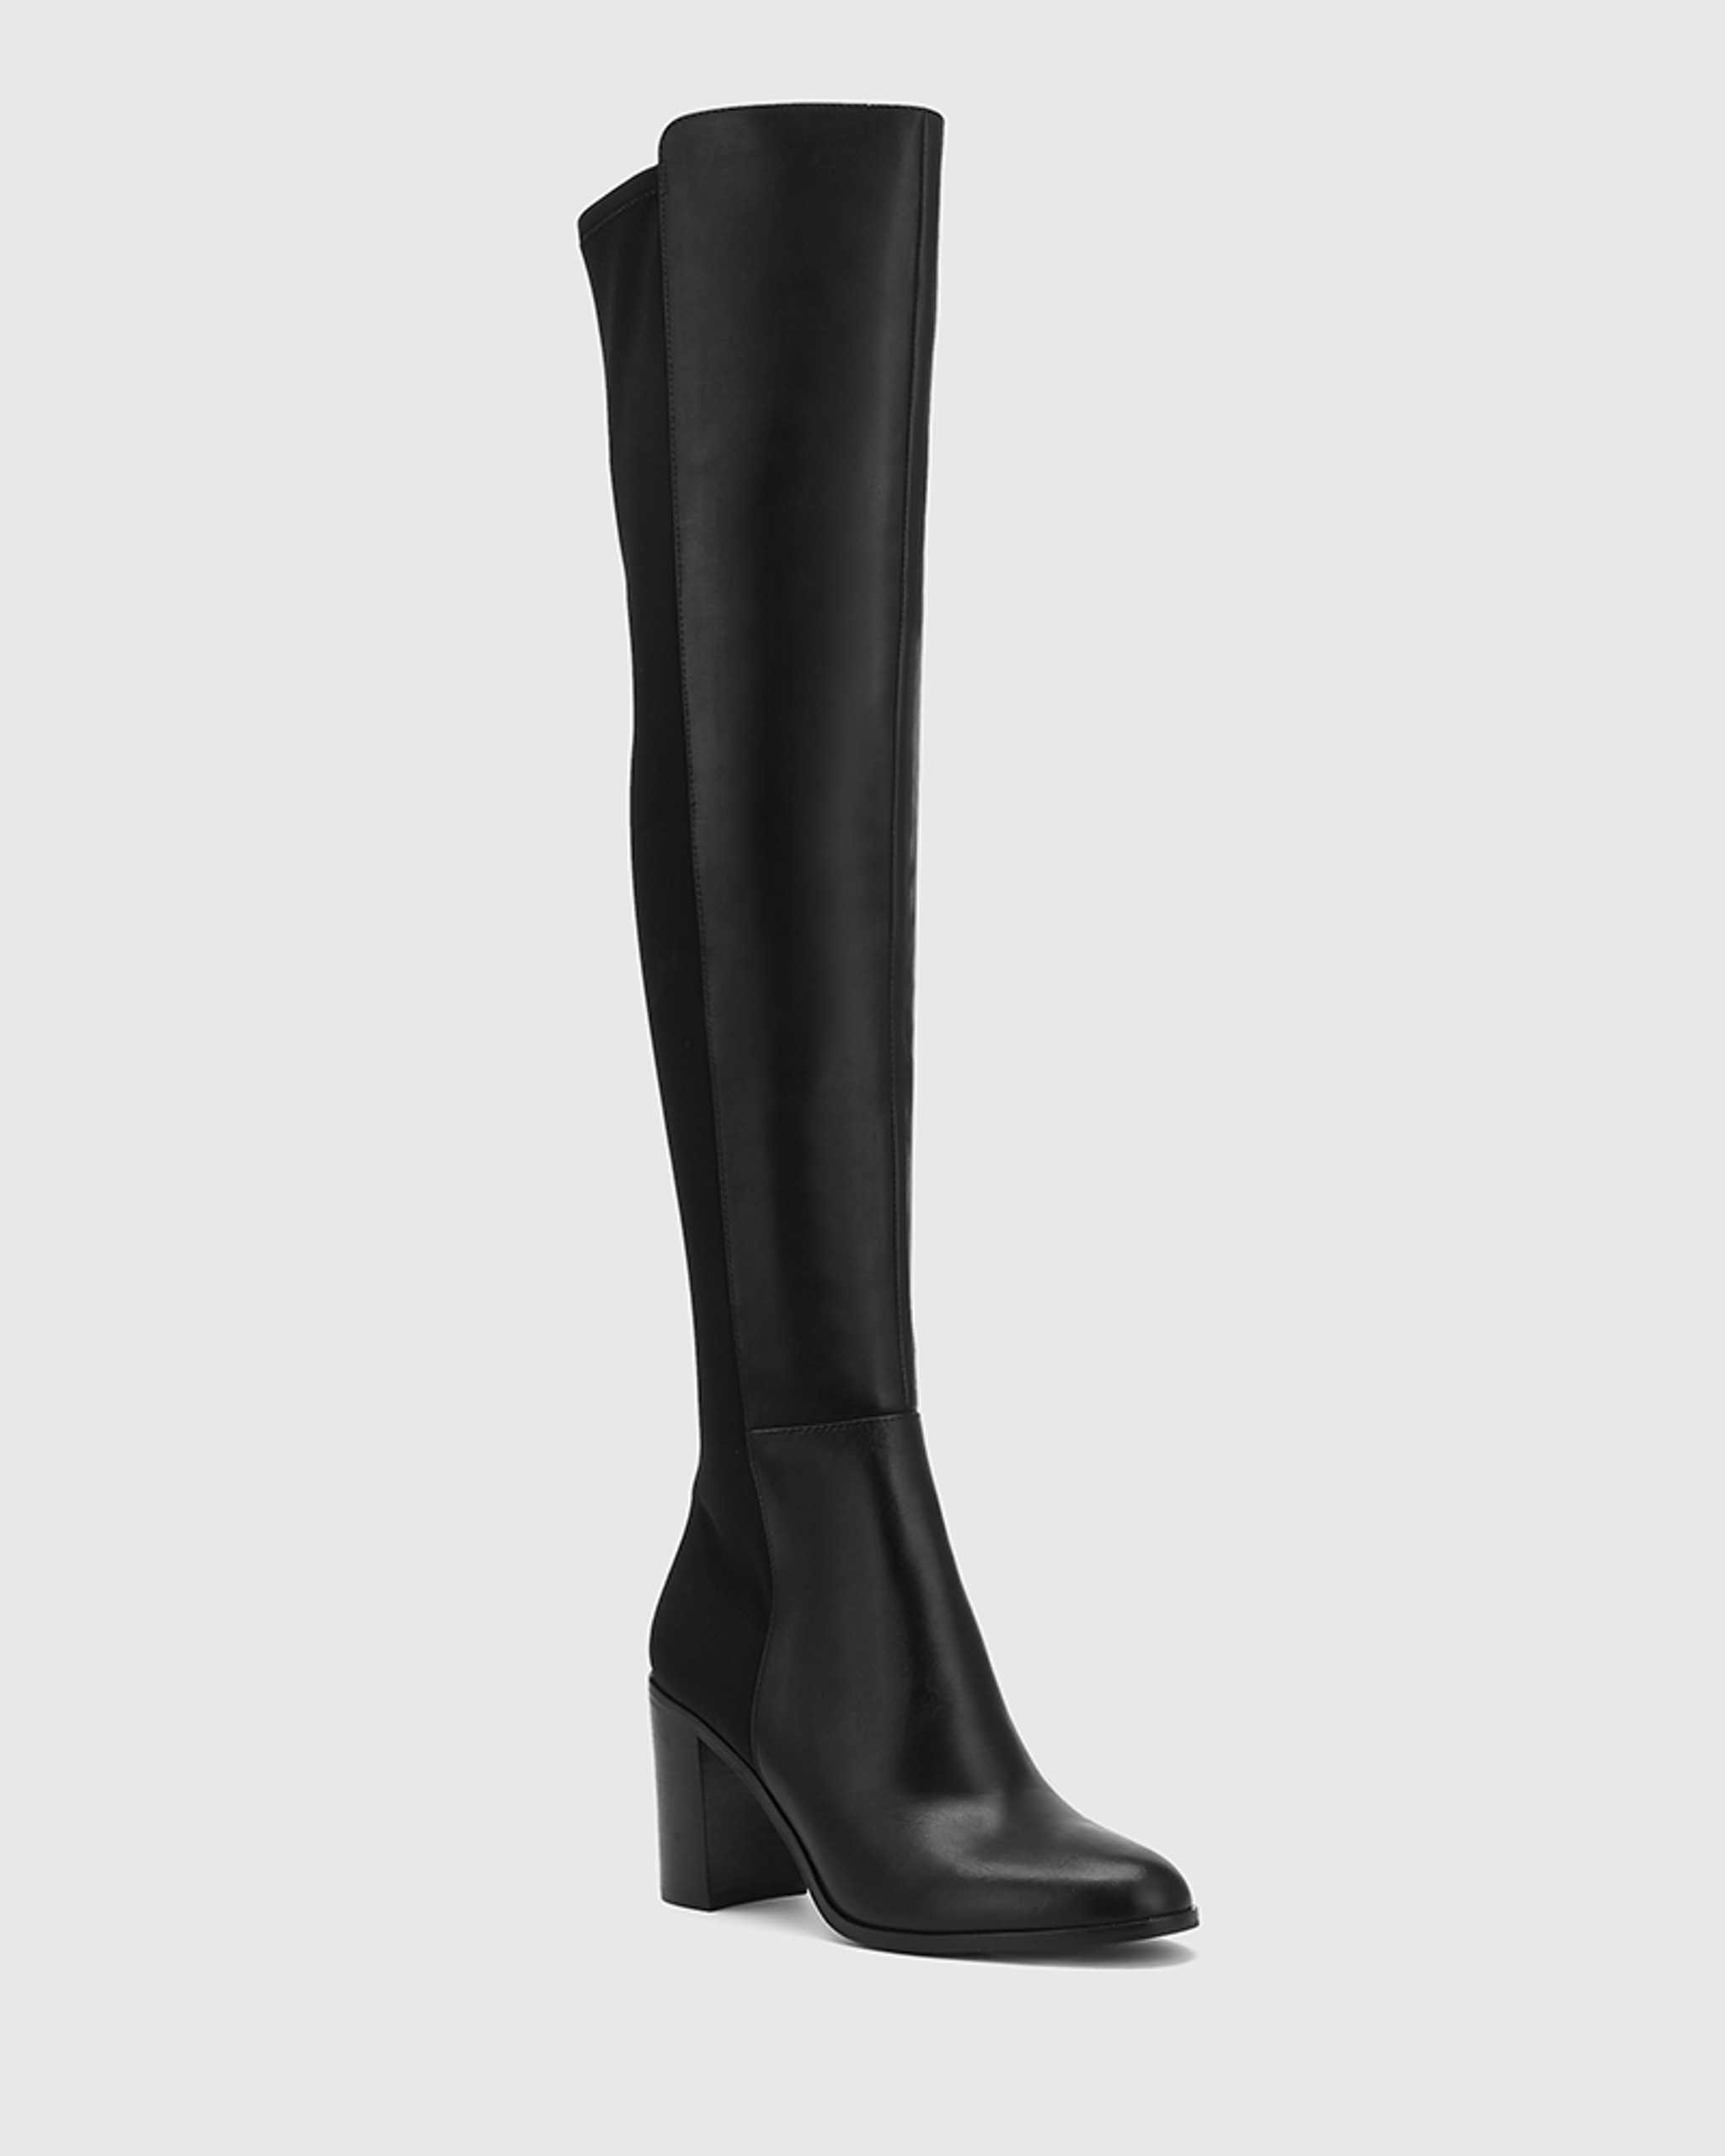 Ranen Black Leather and Neoprene Over The Knee Boot